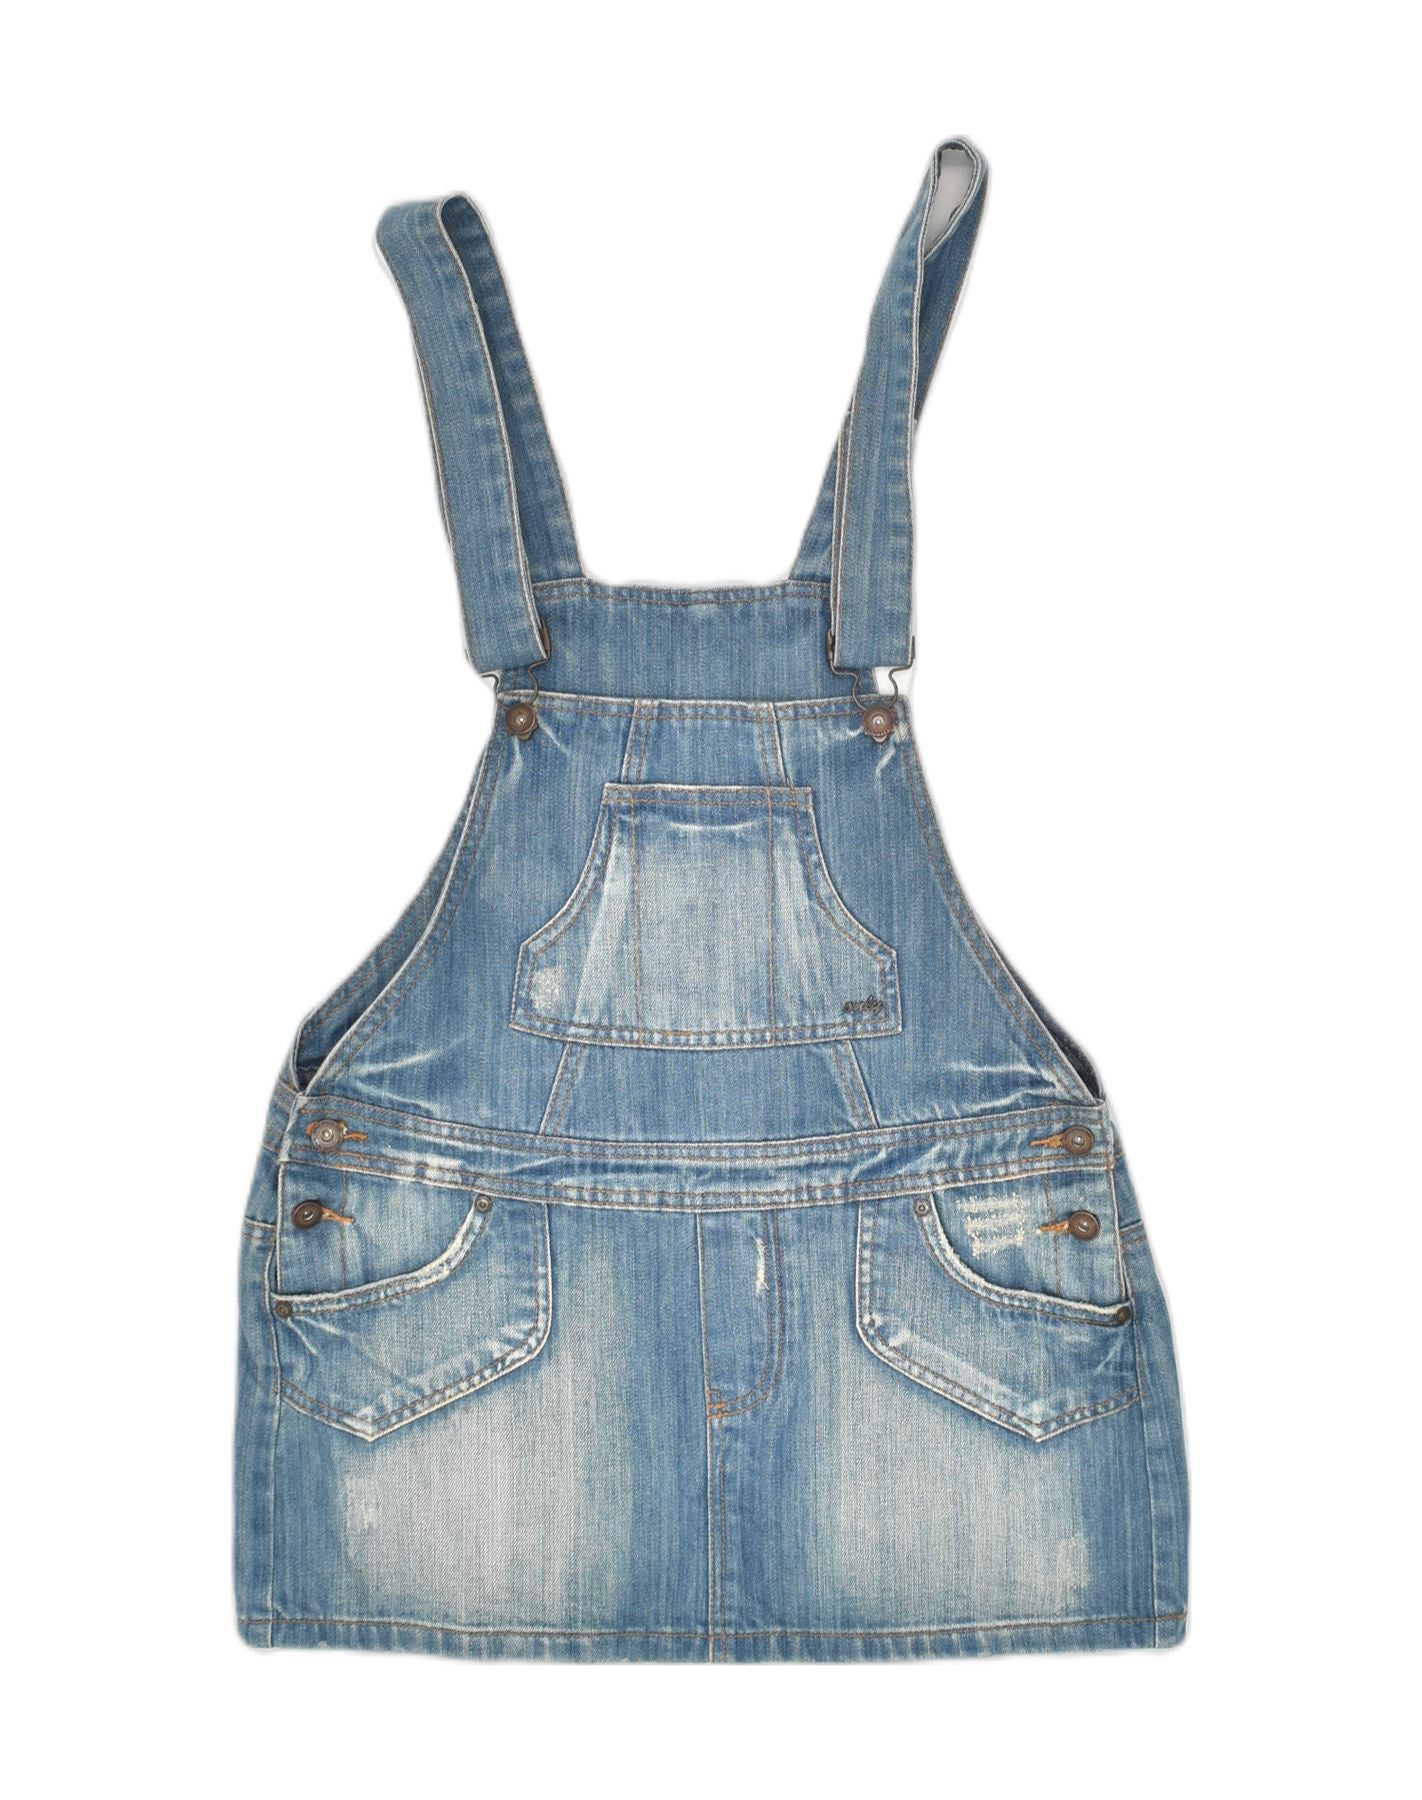 GEORGE AT ASDA Denim Dungarees Dress Size 20 New Without Tags £3.99 -  PicClick UK